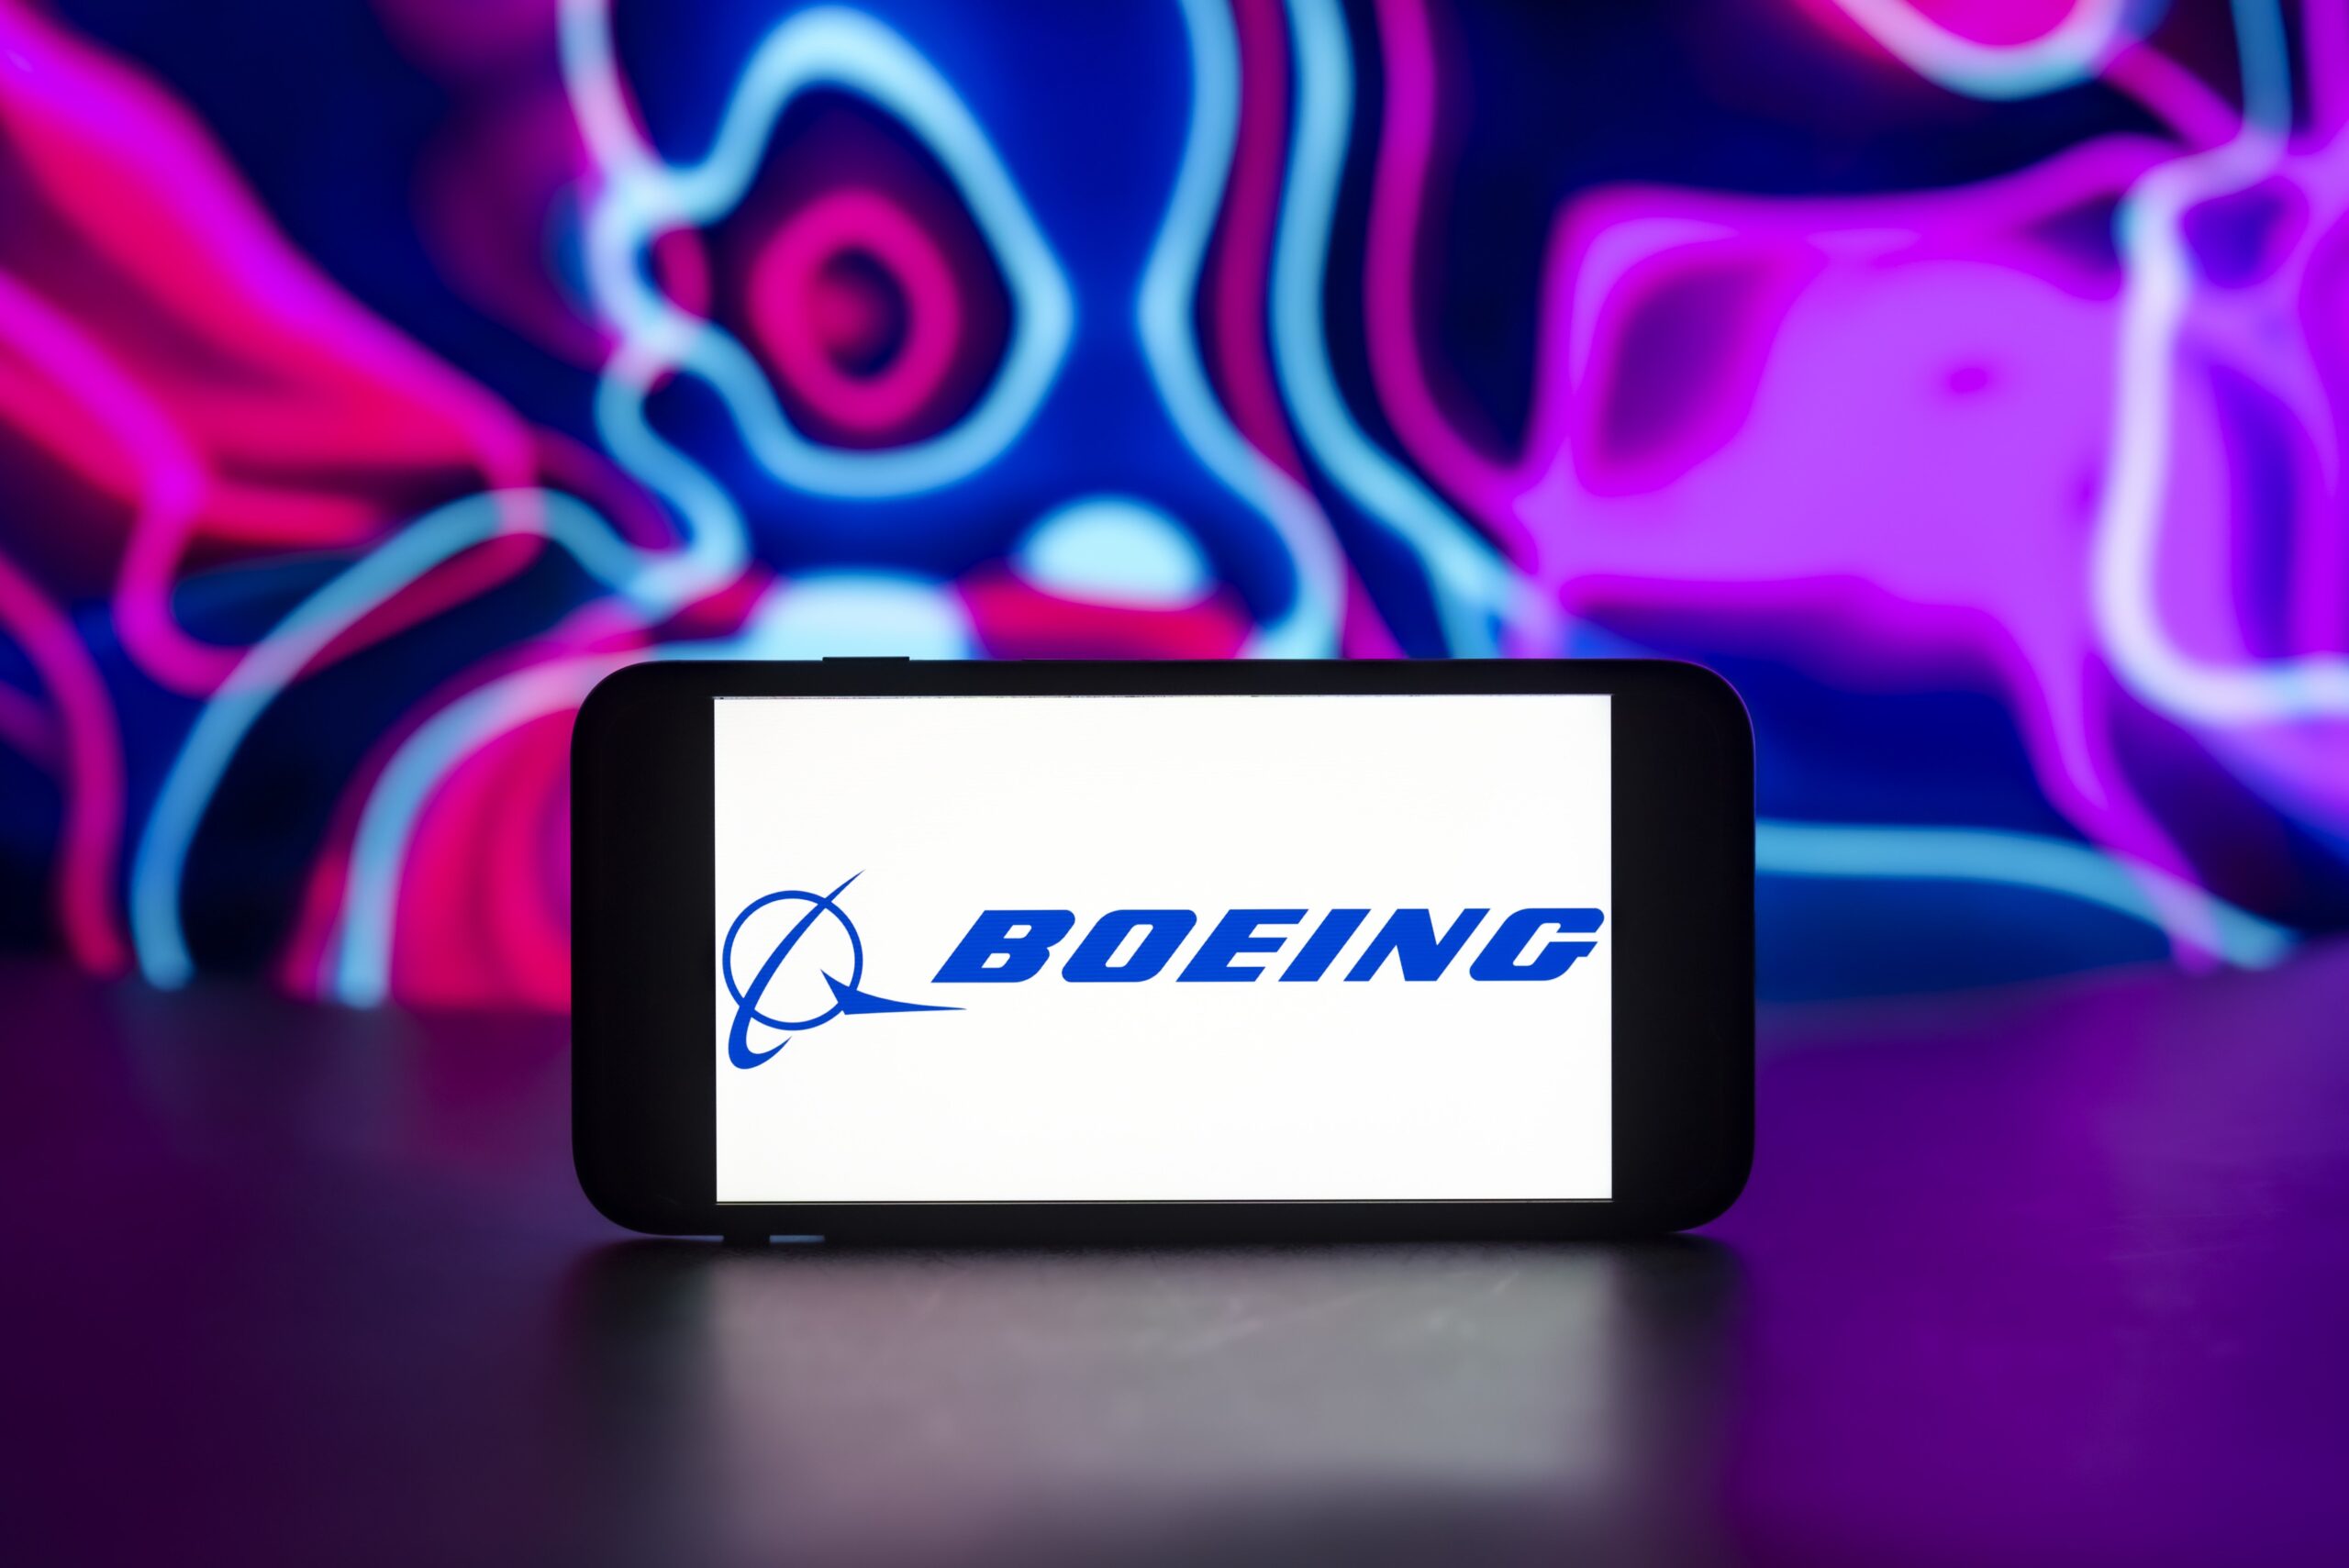 boeing logo on a phone with colorful background